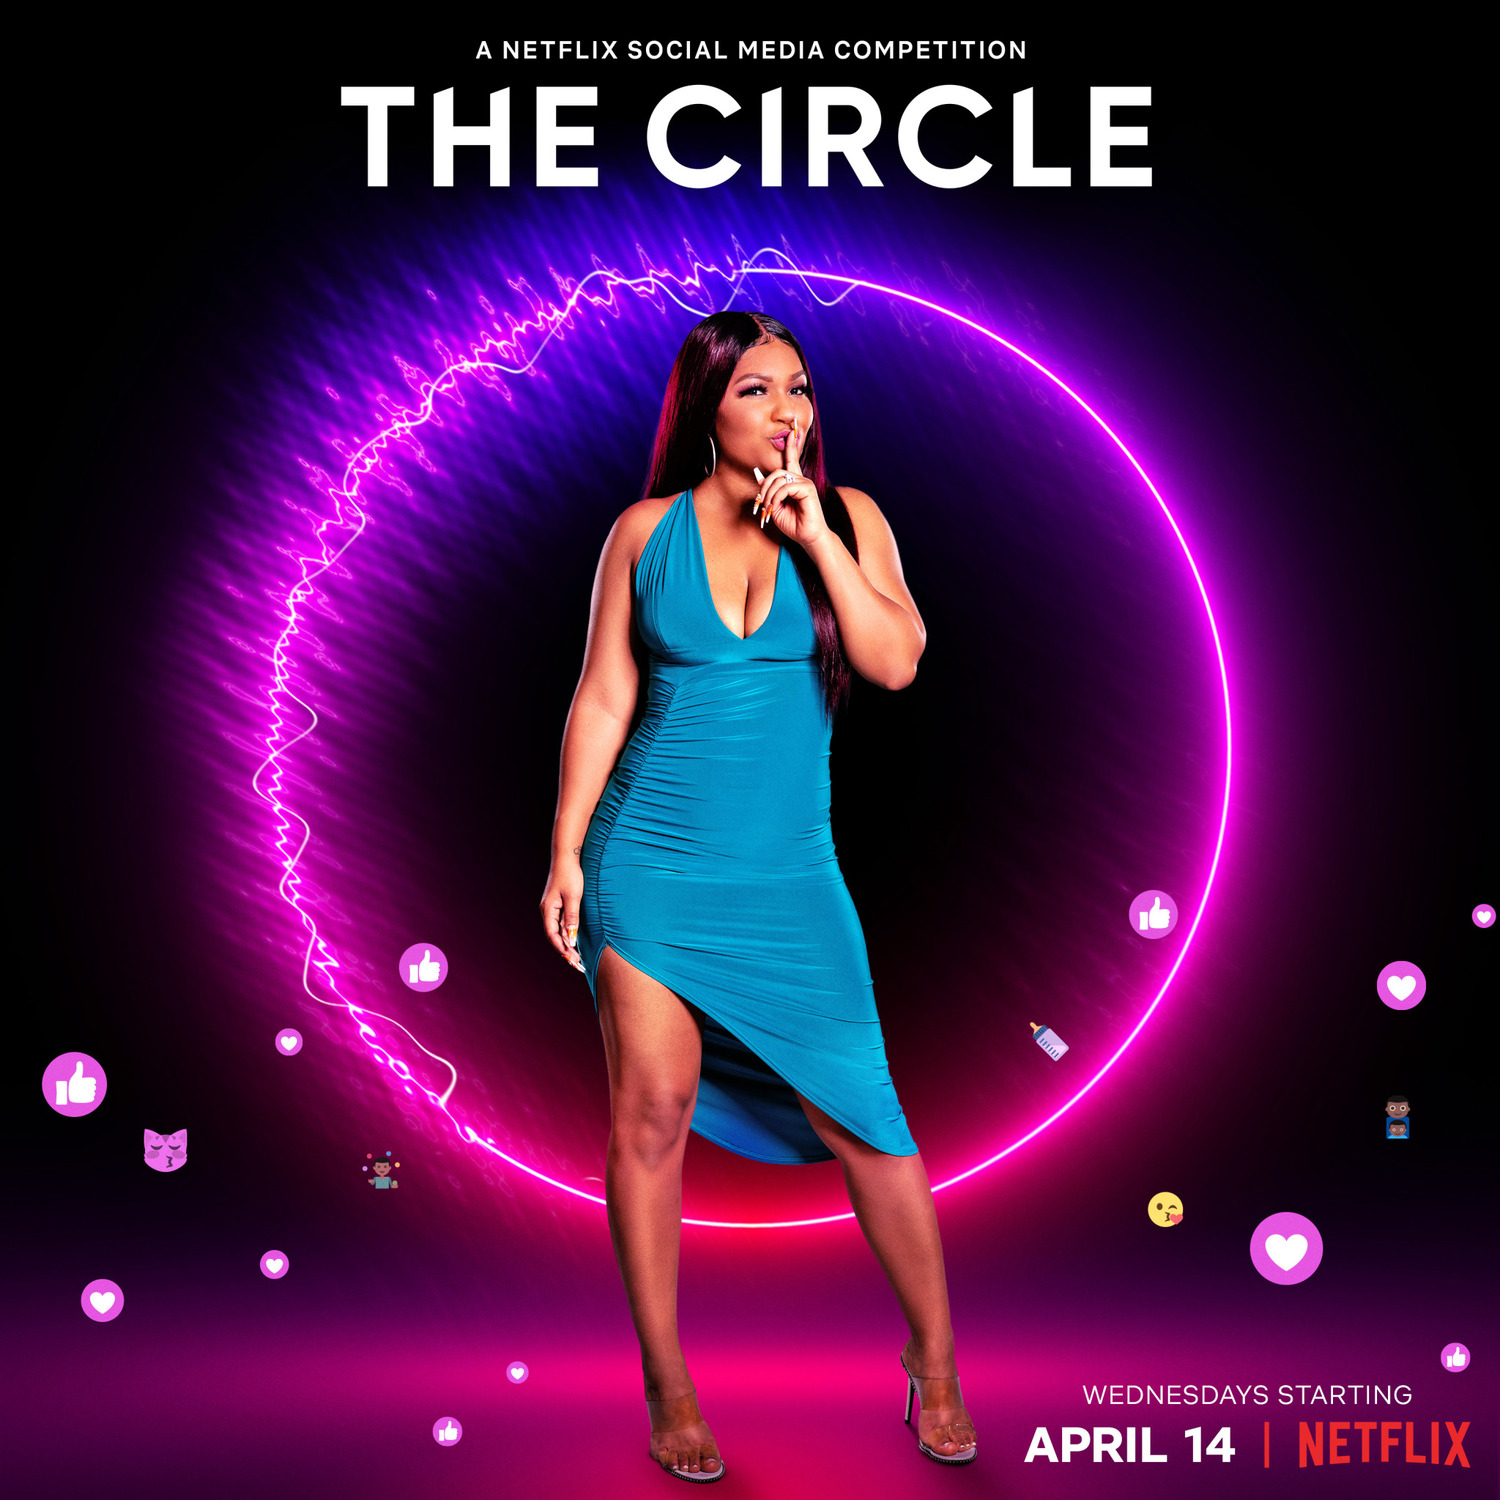 Extra Large TV Poster Image for The Circle (#9 of 23)